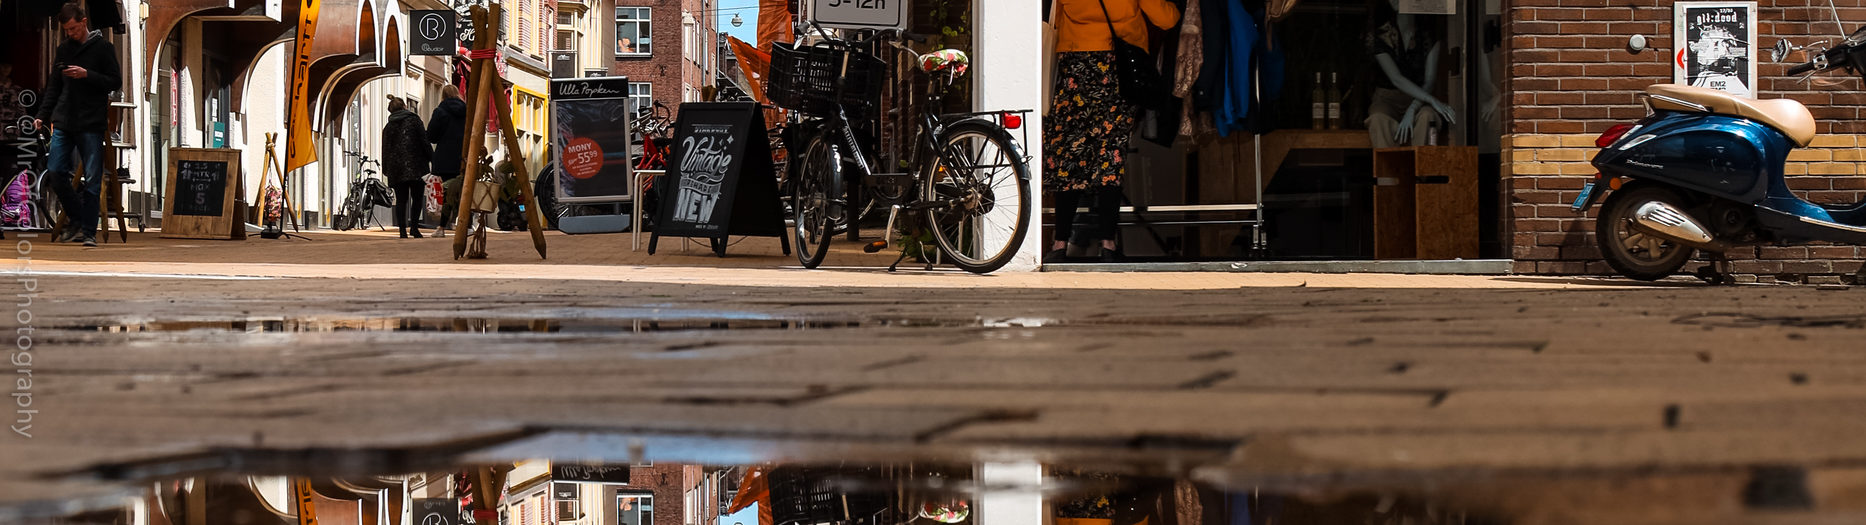 #ReflectionsByColors Today outside @StarDustGroningen by DillenvanderMolen @MrOfColorsPhotography #MrOfColorsPhotography